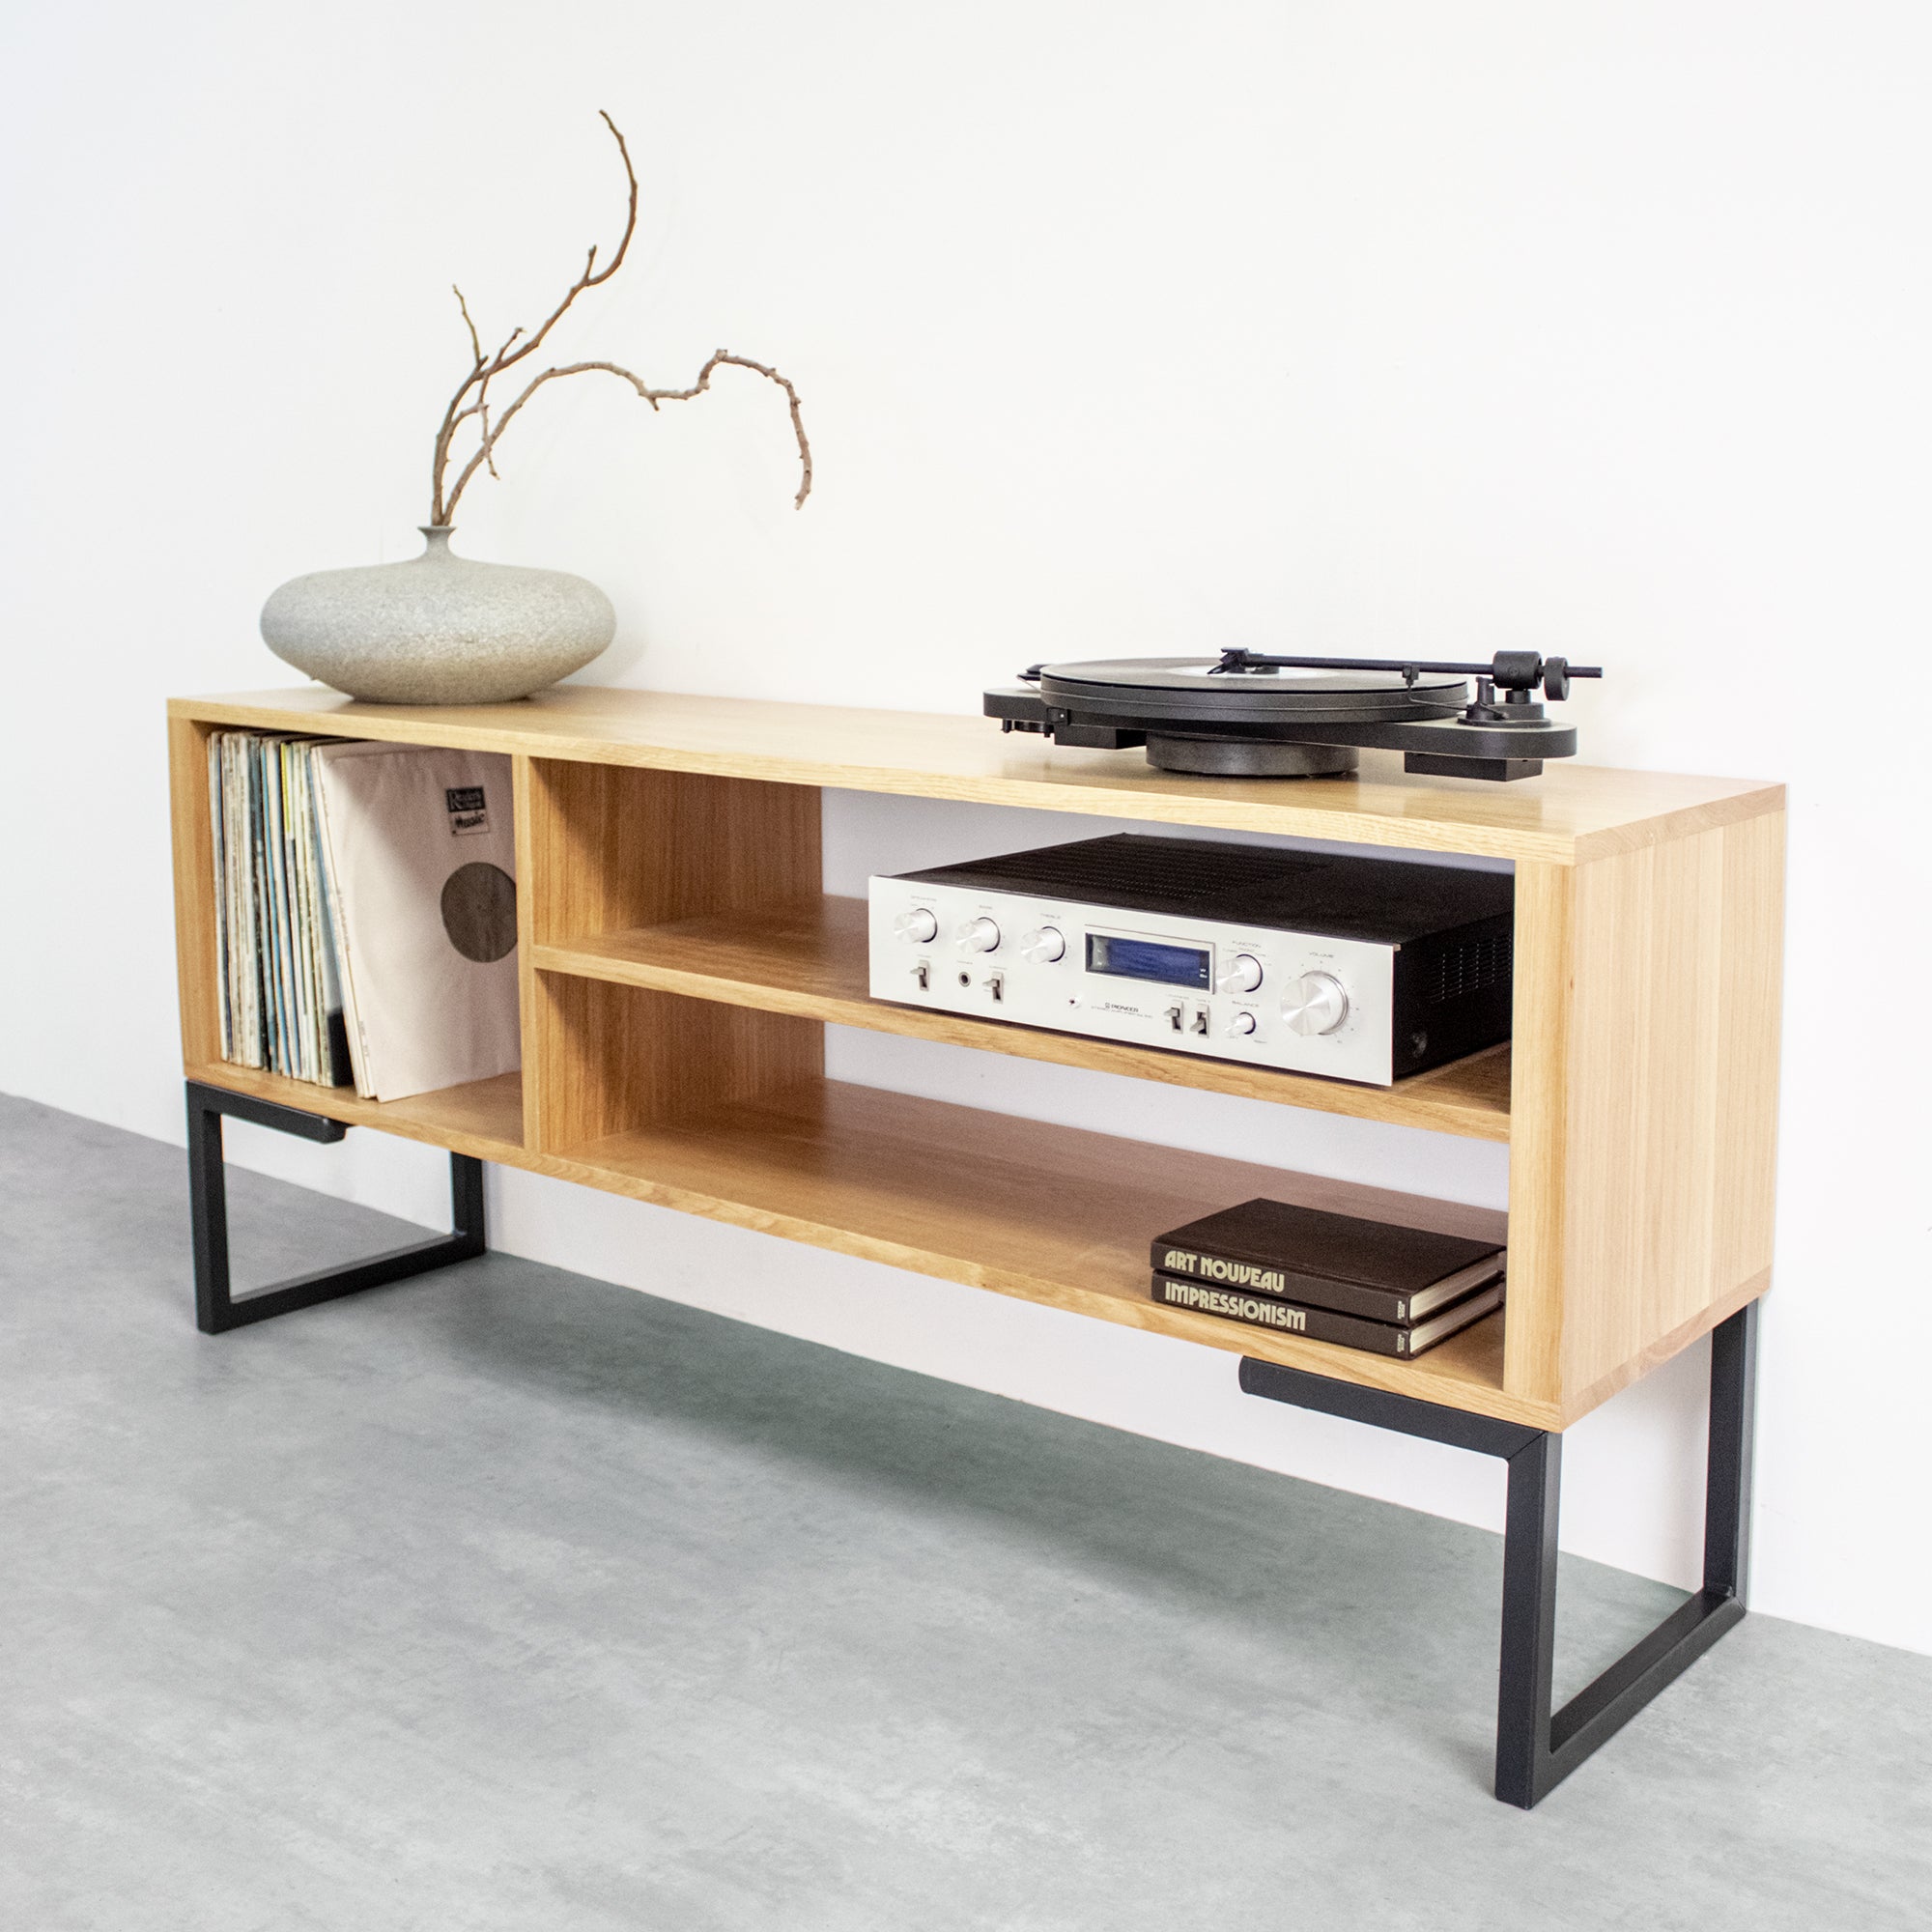 TV, amp or turntable stand in oak